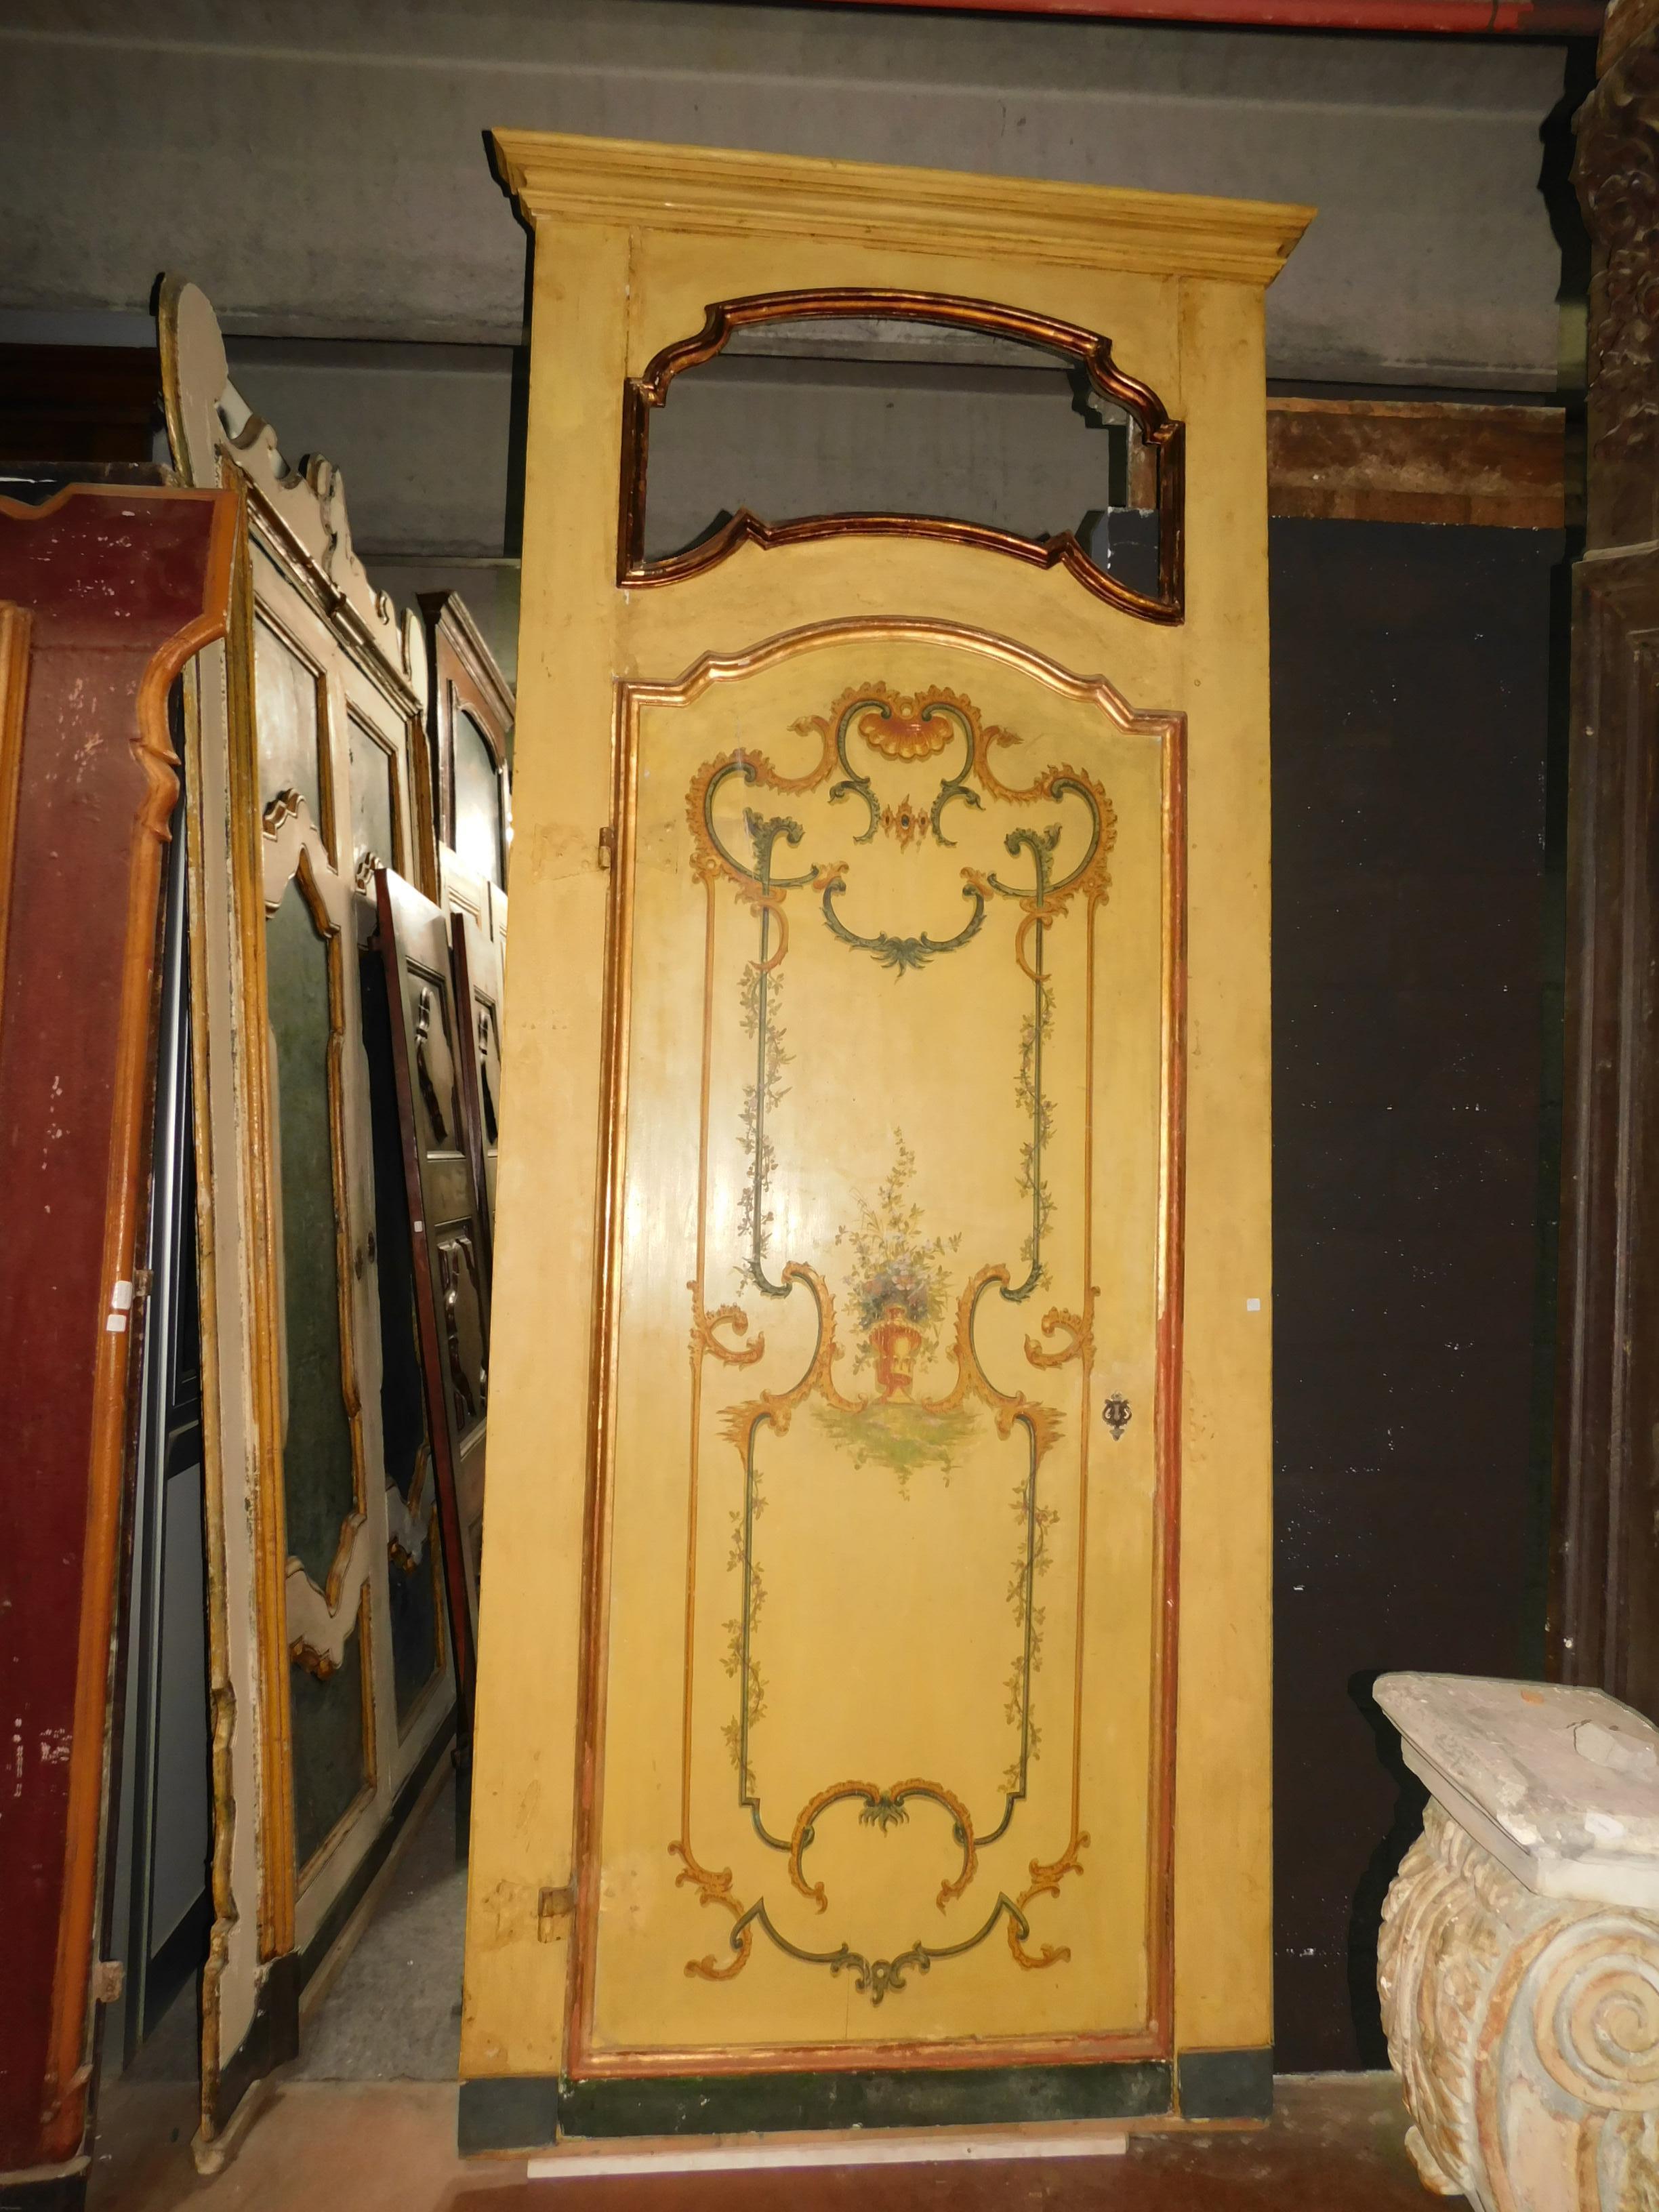 N. 3 Antique yellow and gold lacquered doors, with frame and door with golden frames and handmade floral paintings. From an Italian artist.
epoch second half eighteenth century, from Piedmontese castle (northern Italy).
max. Size125 x H 310, door